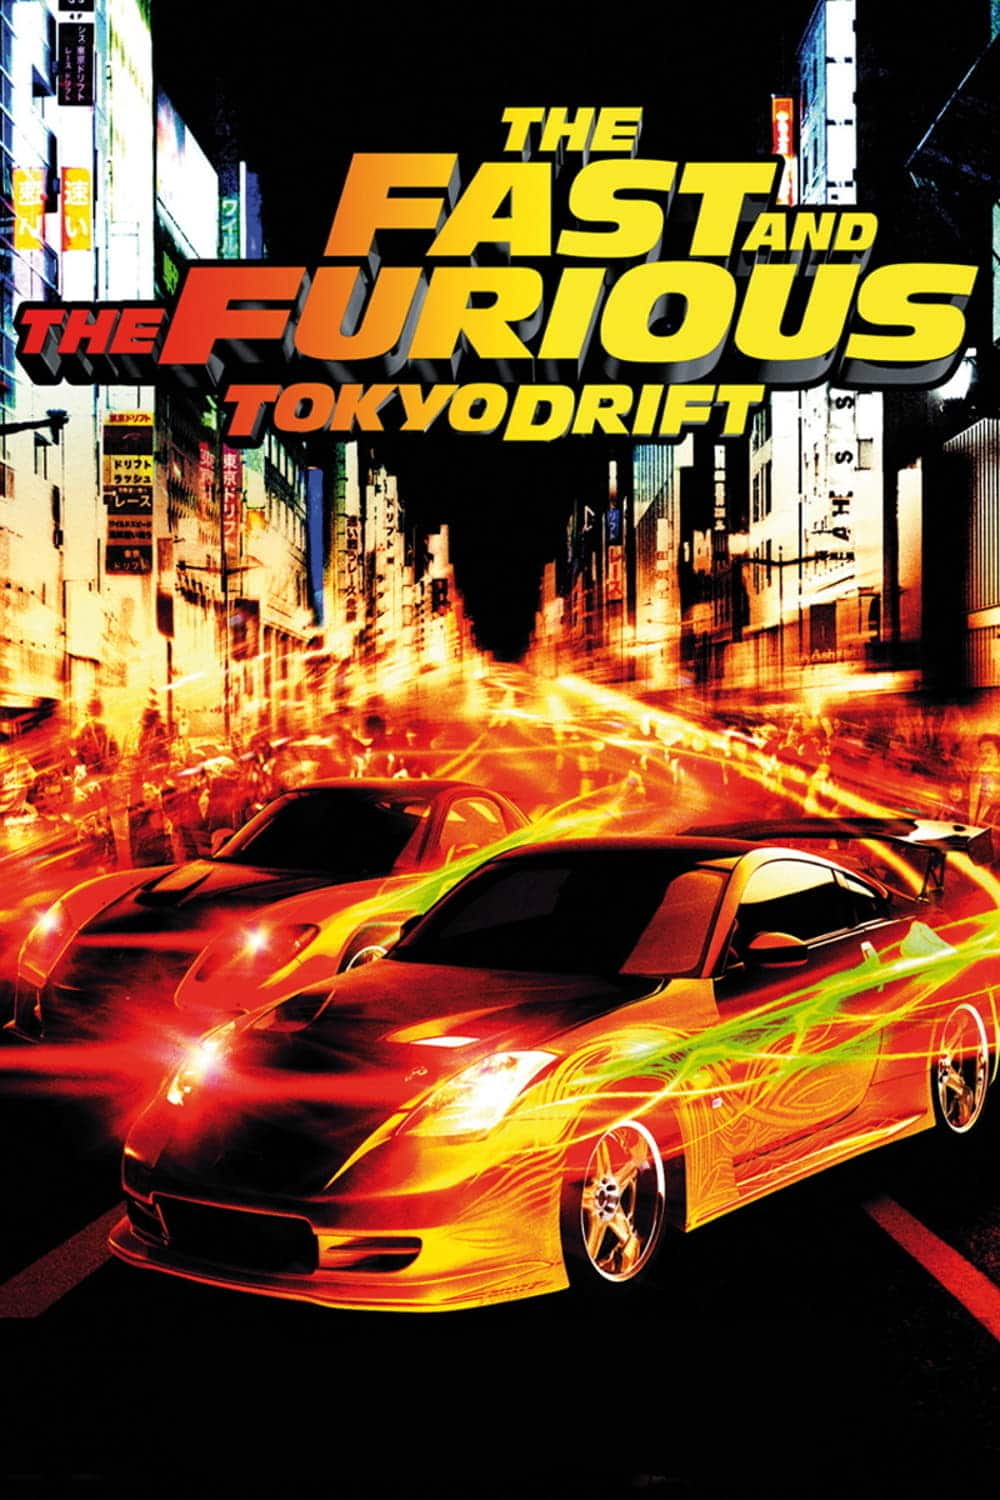 Plakat von "The Fast and the Furious: Tokyo Drift"